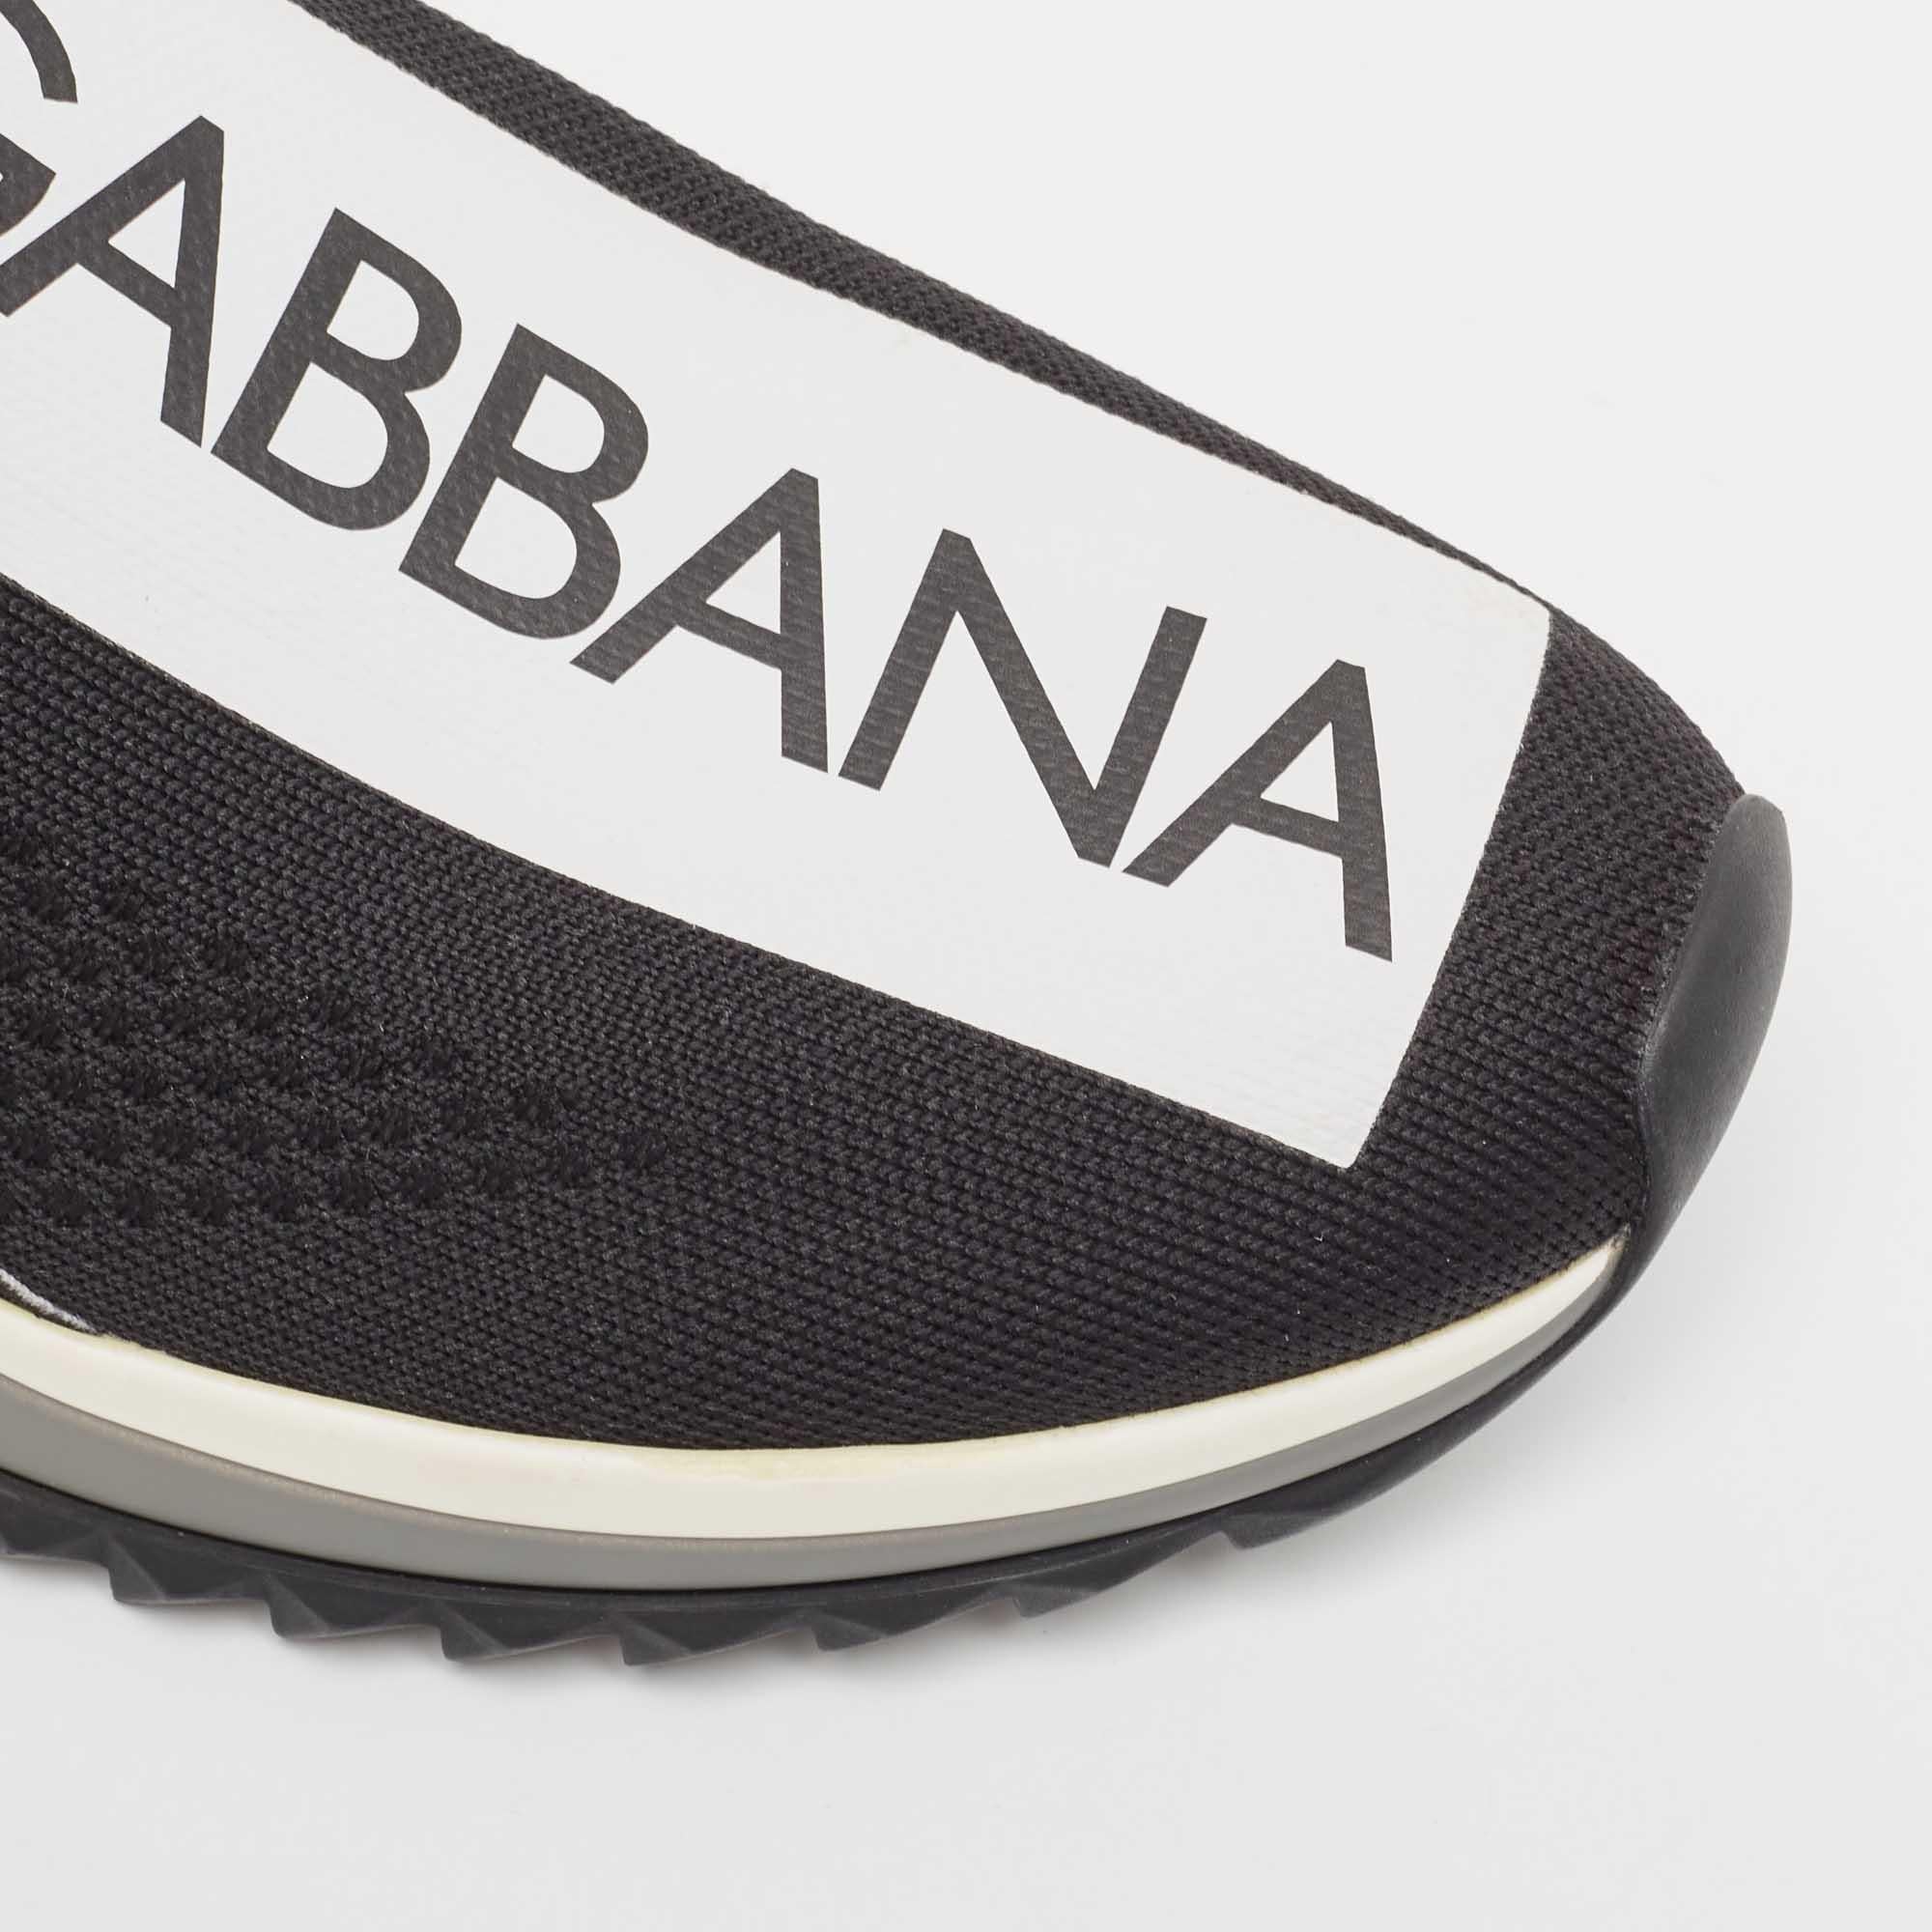 Dolce & Gabbana Black Knit Fabric Sorrento Sneakers Size 38 For Sale 2